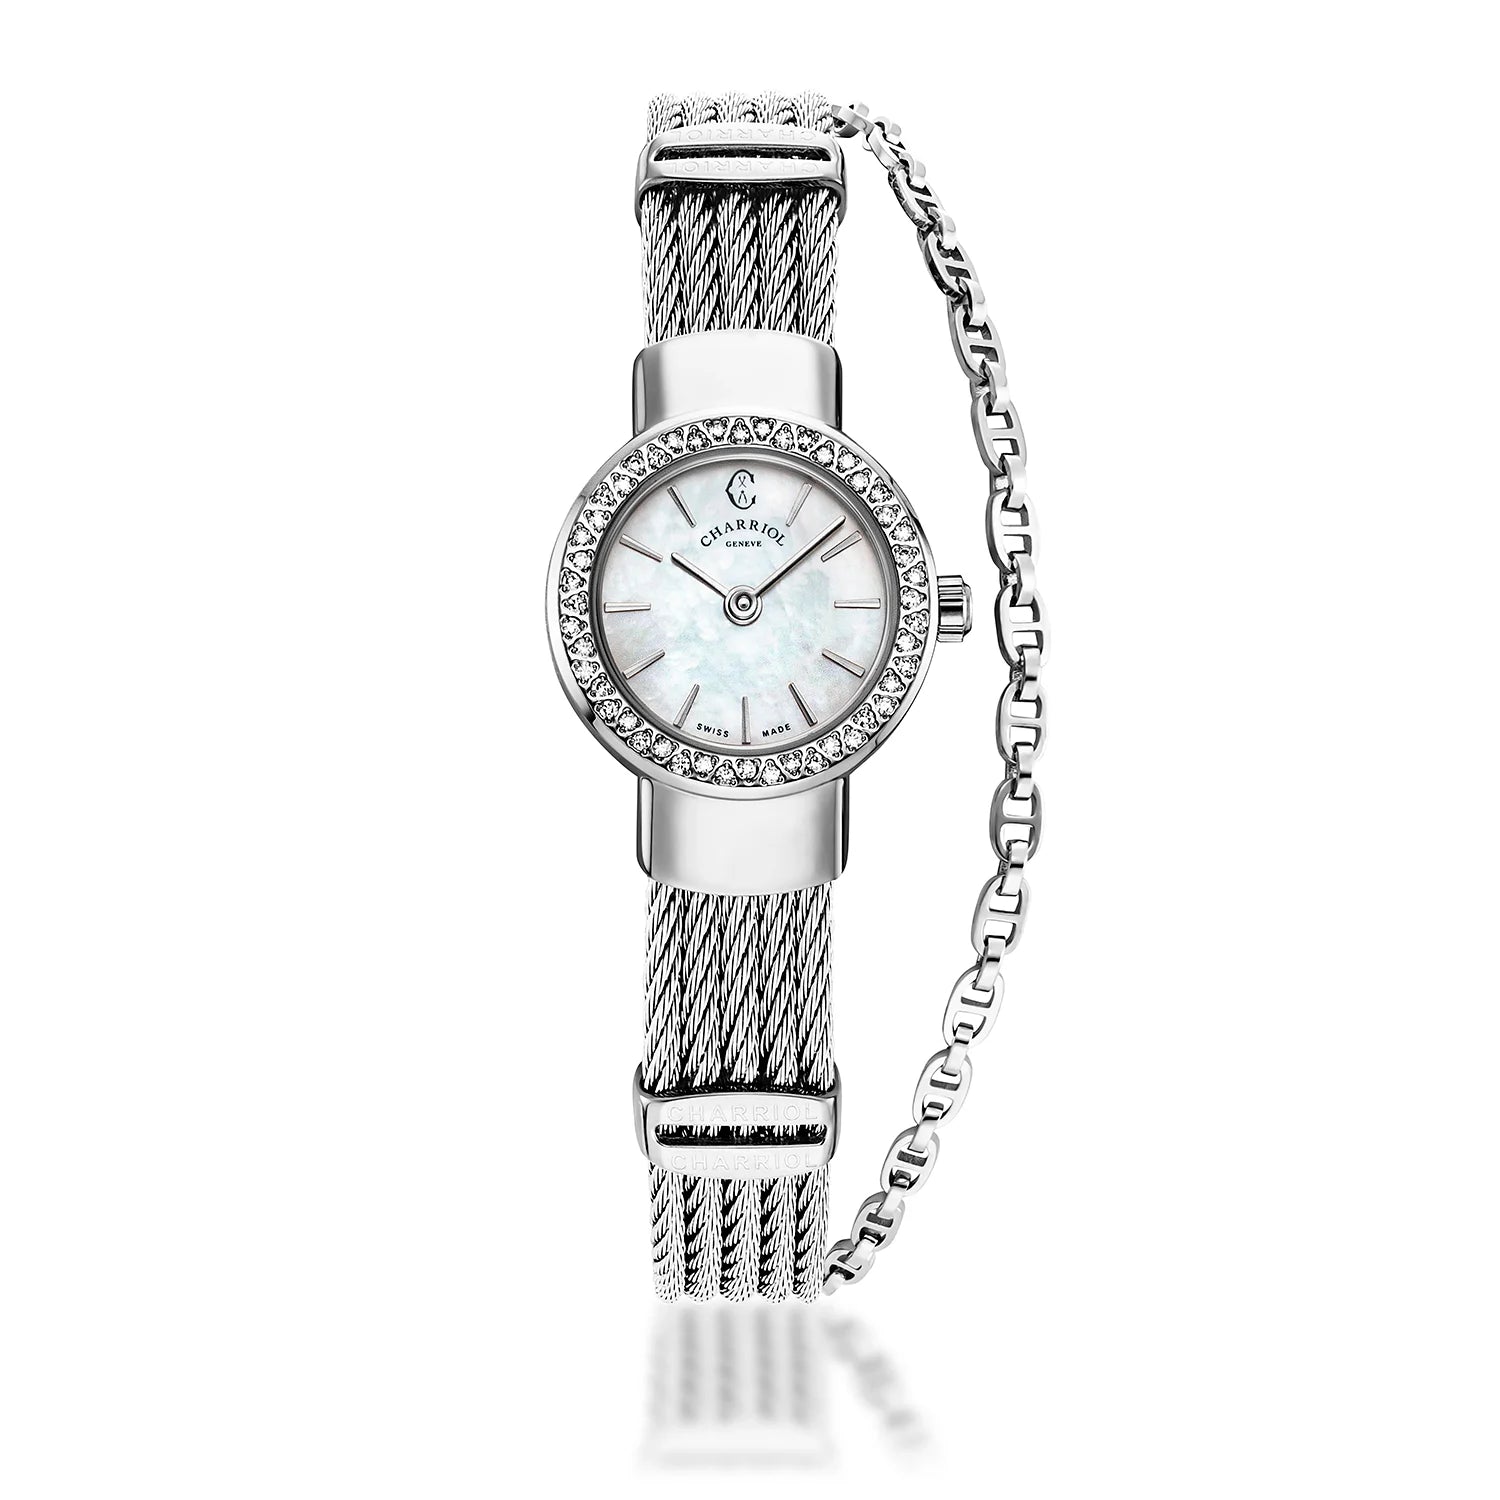 St Tropez Icon 20mm Watch Stainless Steel, Steel Cable, 48 Diamonds Bezel and White MOP Dial - Charriol Geneve -  Watch